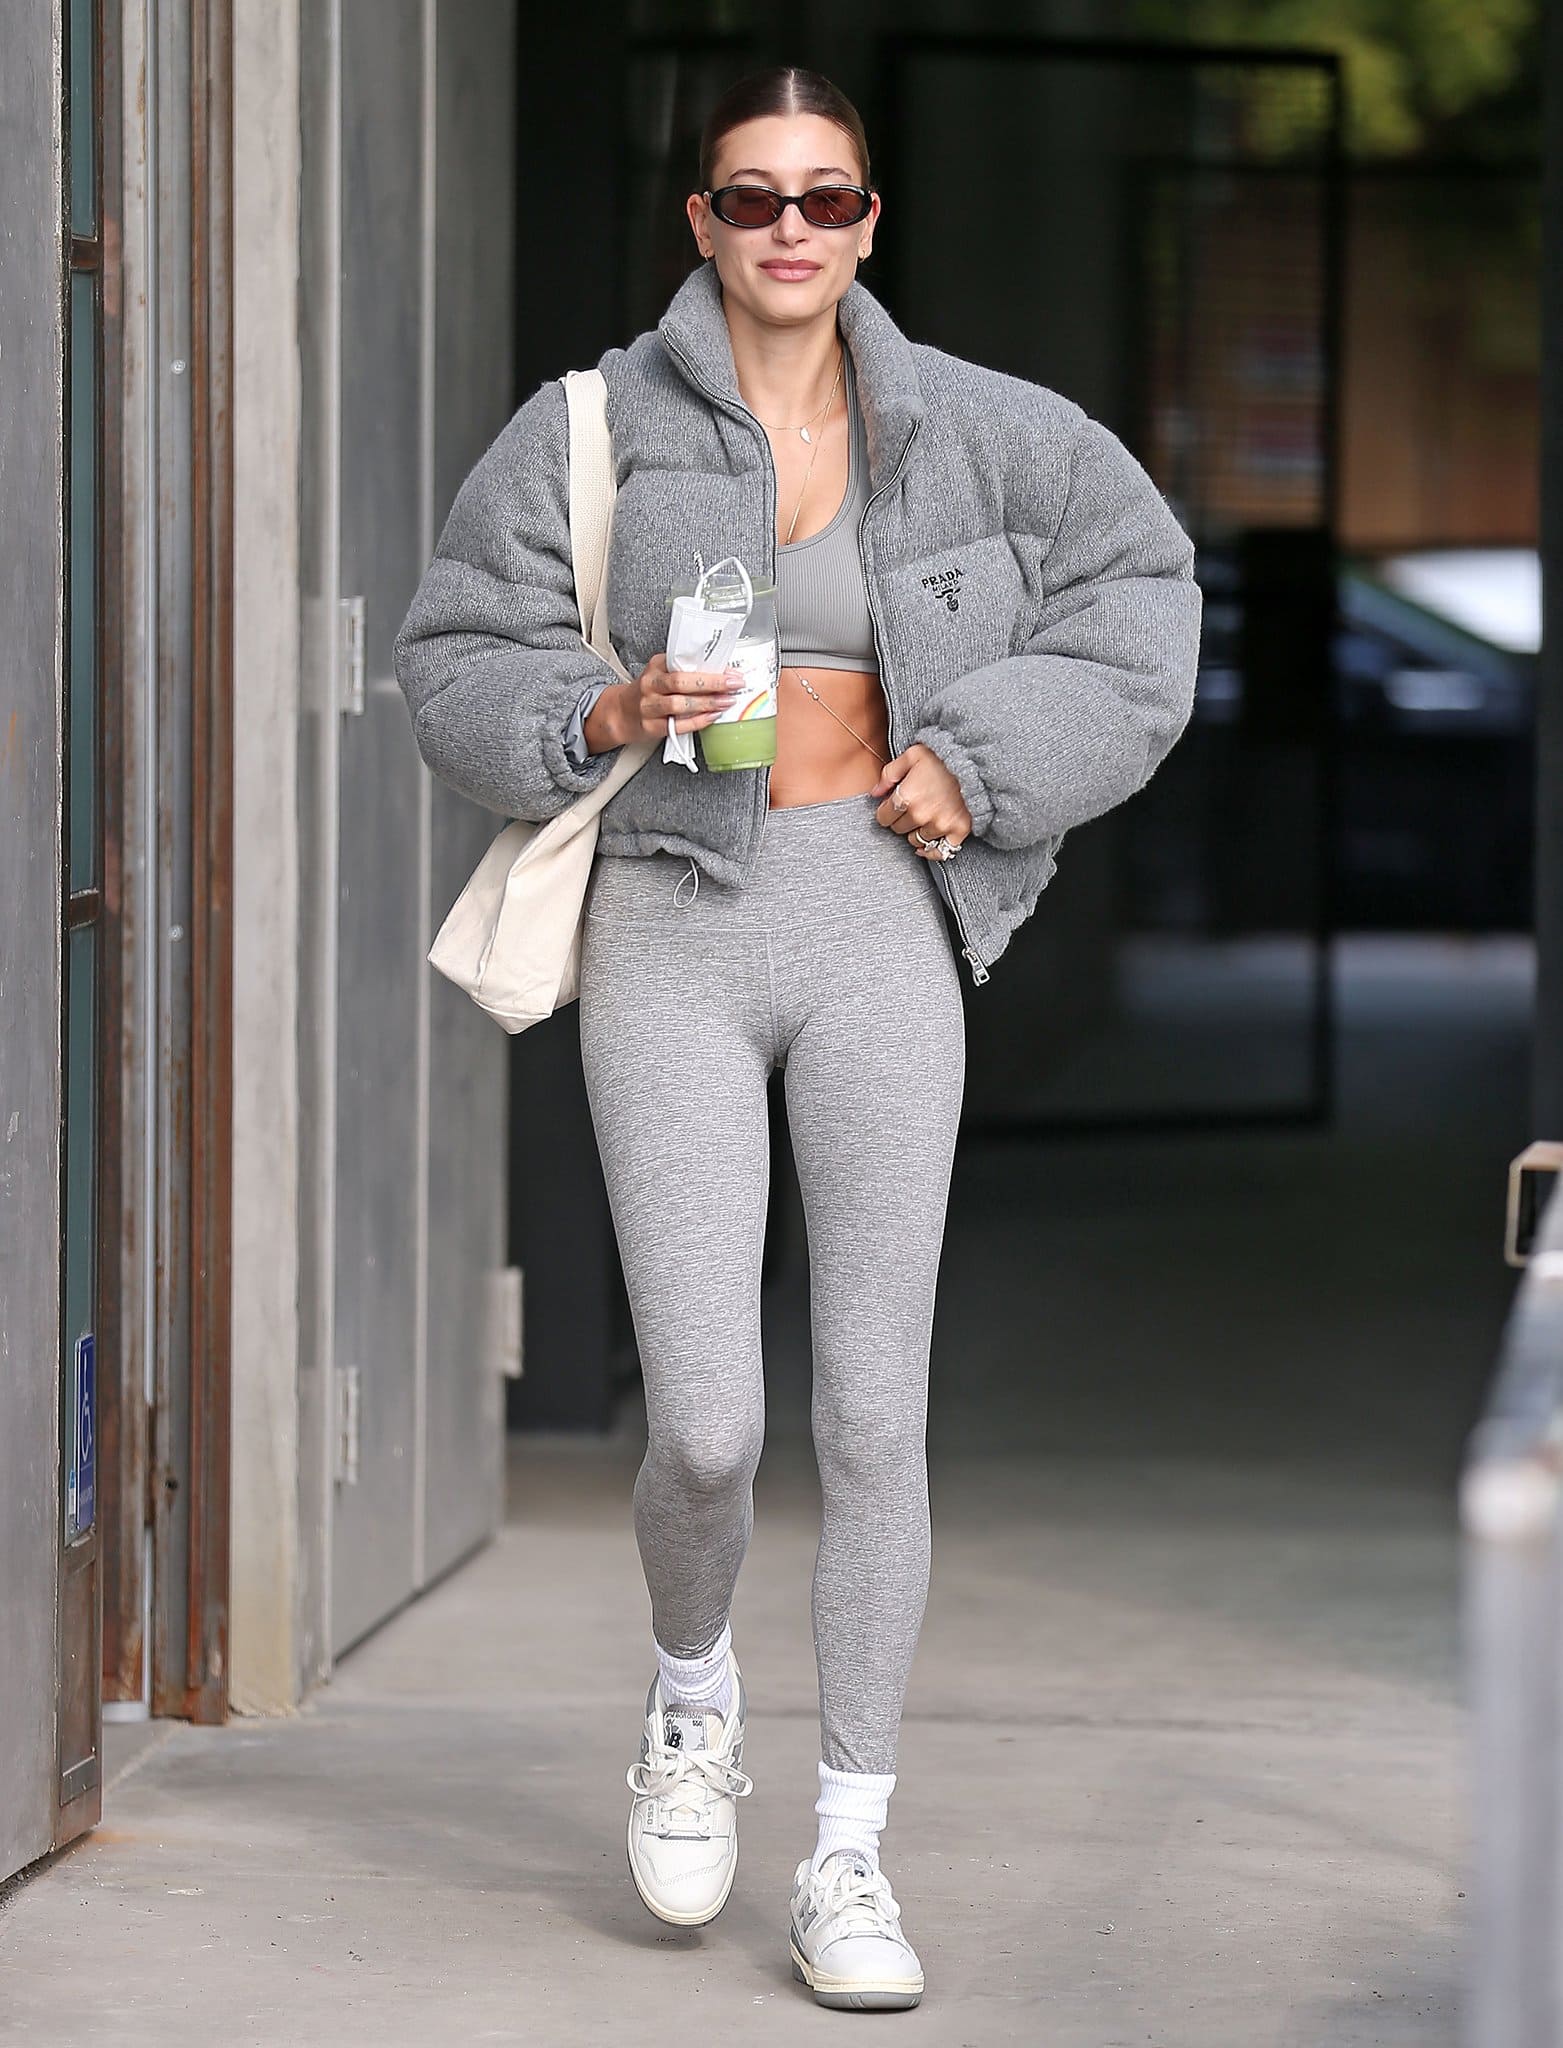 Hailey Bieber shows her abs in monochrome gray activewear with a Prada puffer jacket